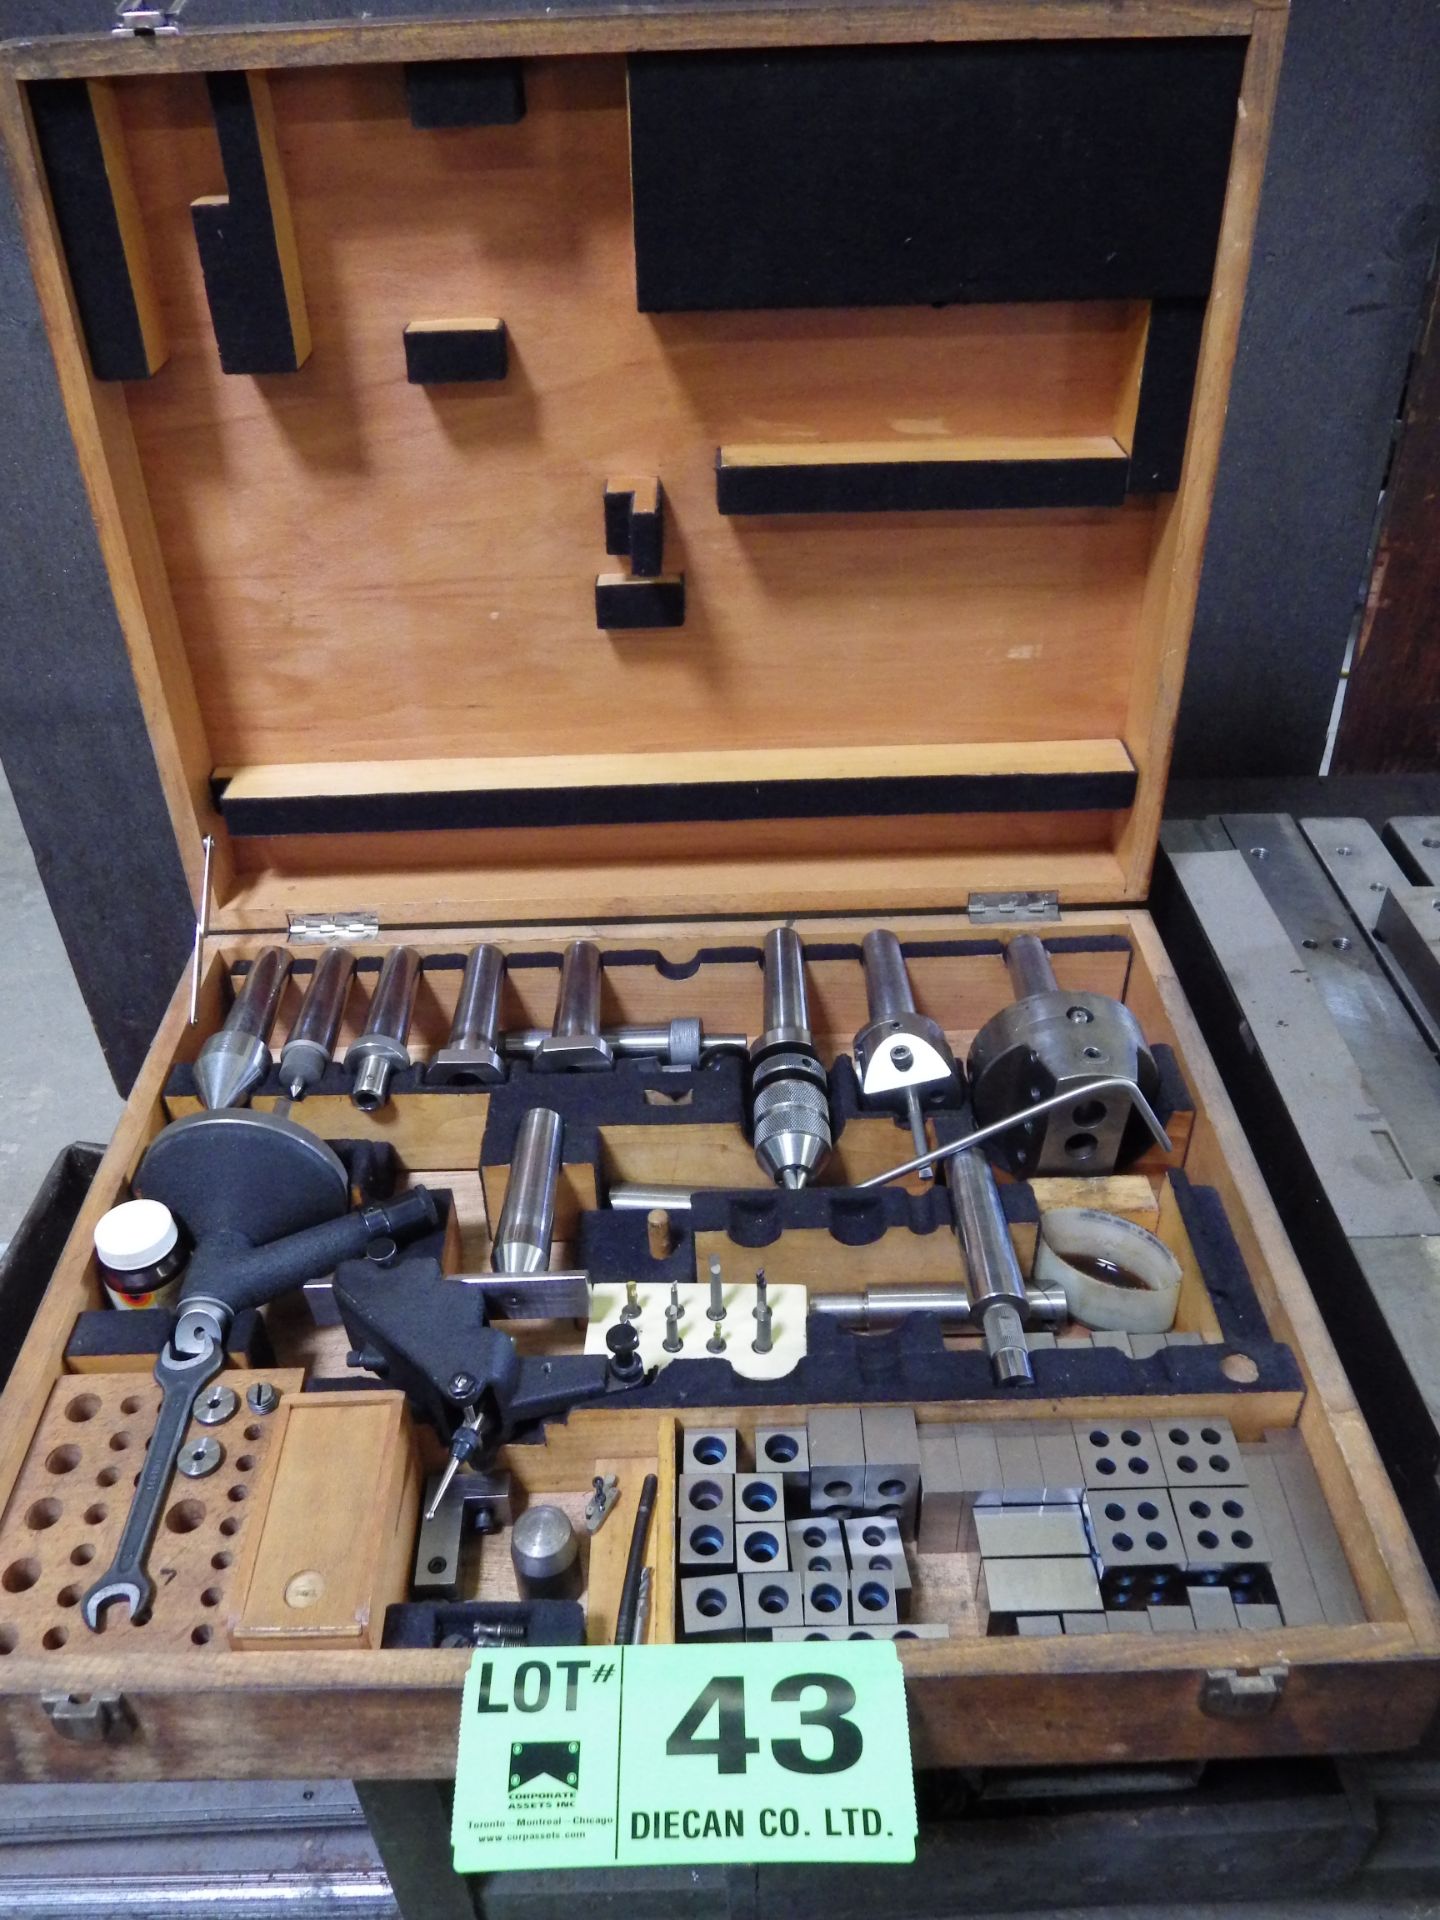 LOT/ HAUSER JIG BORE TOOLING KIT WITH OFFSET BORING HEADS, TOOL CHUCK, PROBE ATTACHMENT, CENTERS AND